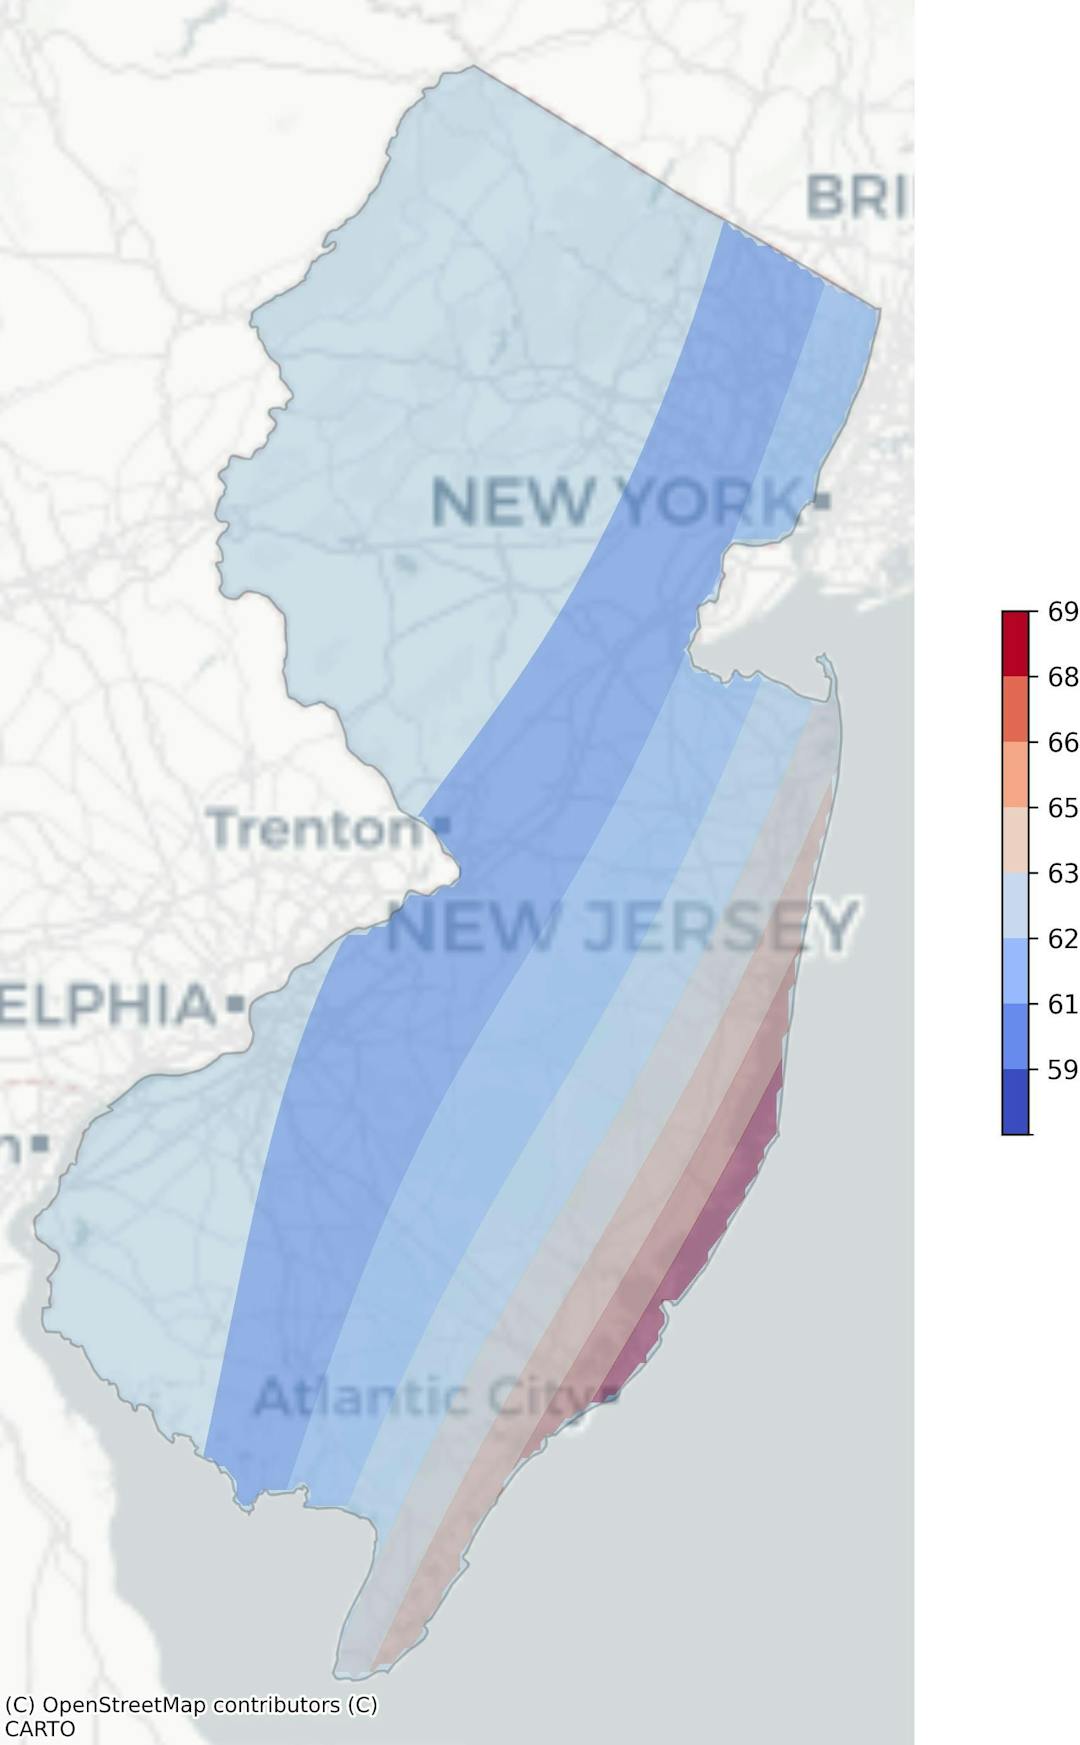 New Jersey tropical cyclone risk heat map: Regions color-coded based on frequency of hurricanes and tropical storms, weighted by wind speed, derived from NOAA's historical cyclone track data